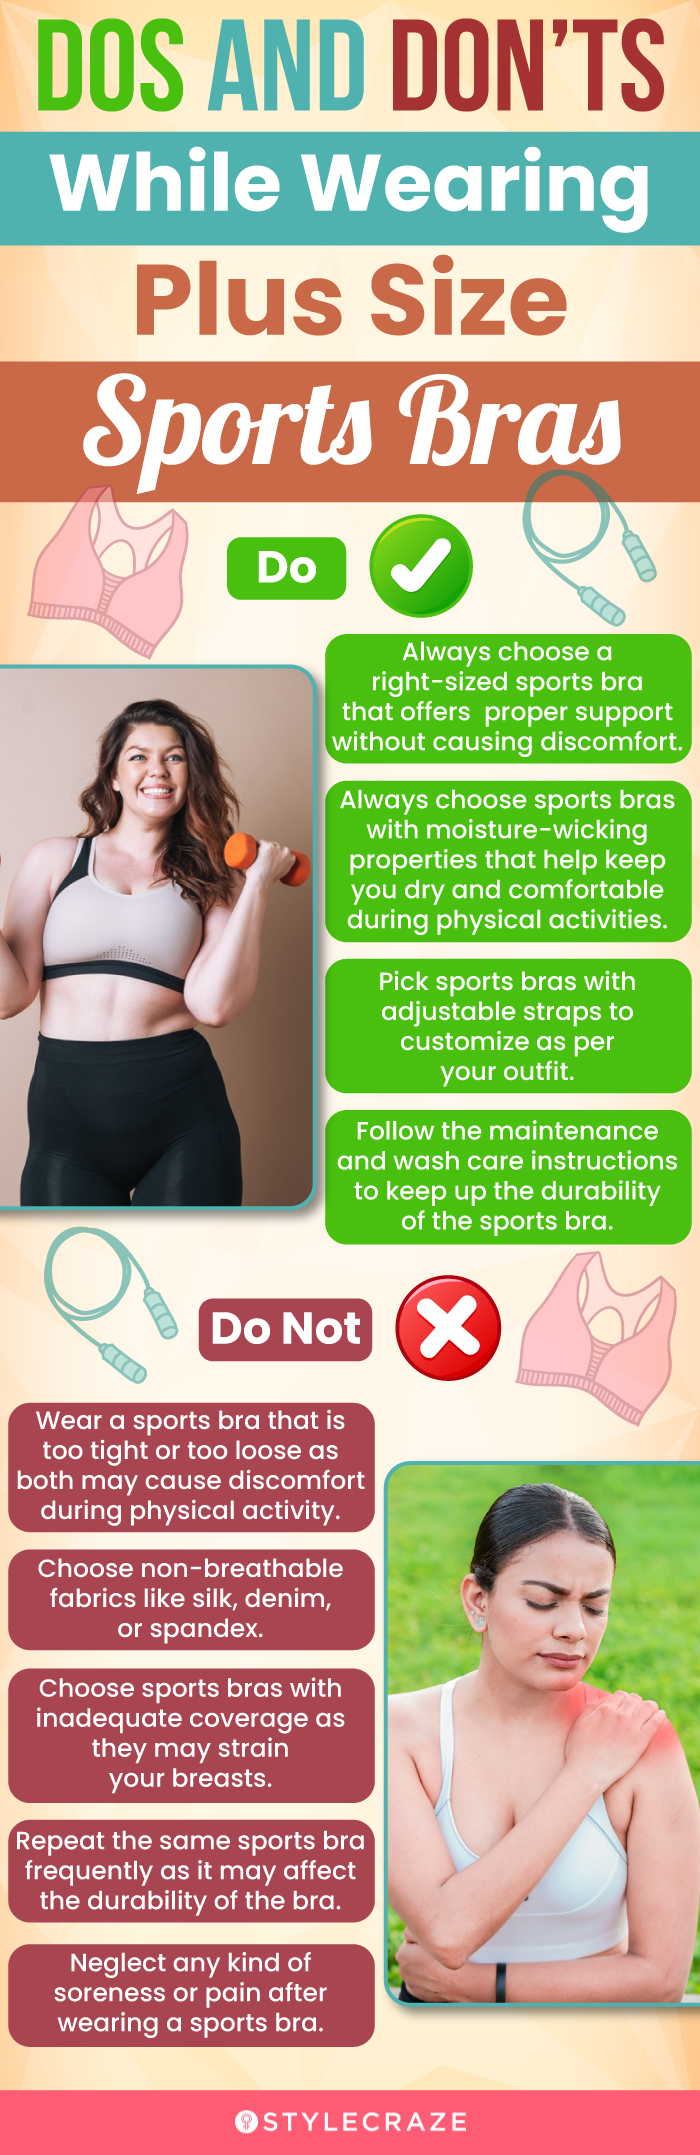 Do’s And Don’ts While Wearing Plus Size Sports Bras (infographic)